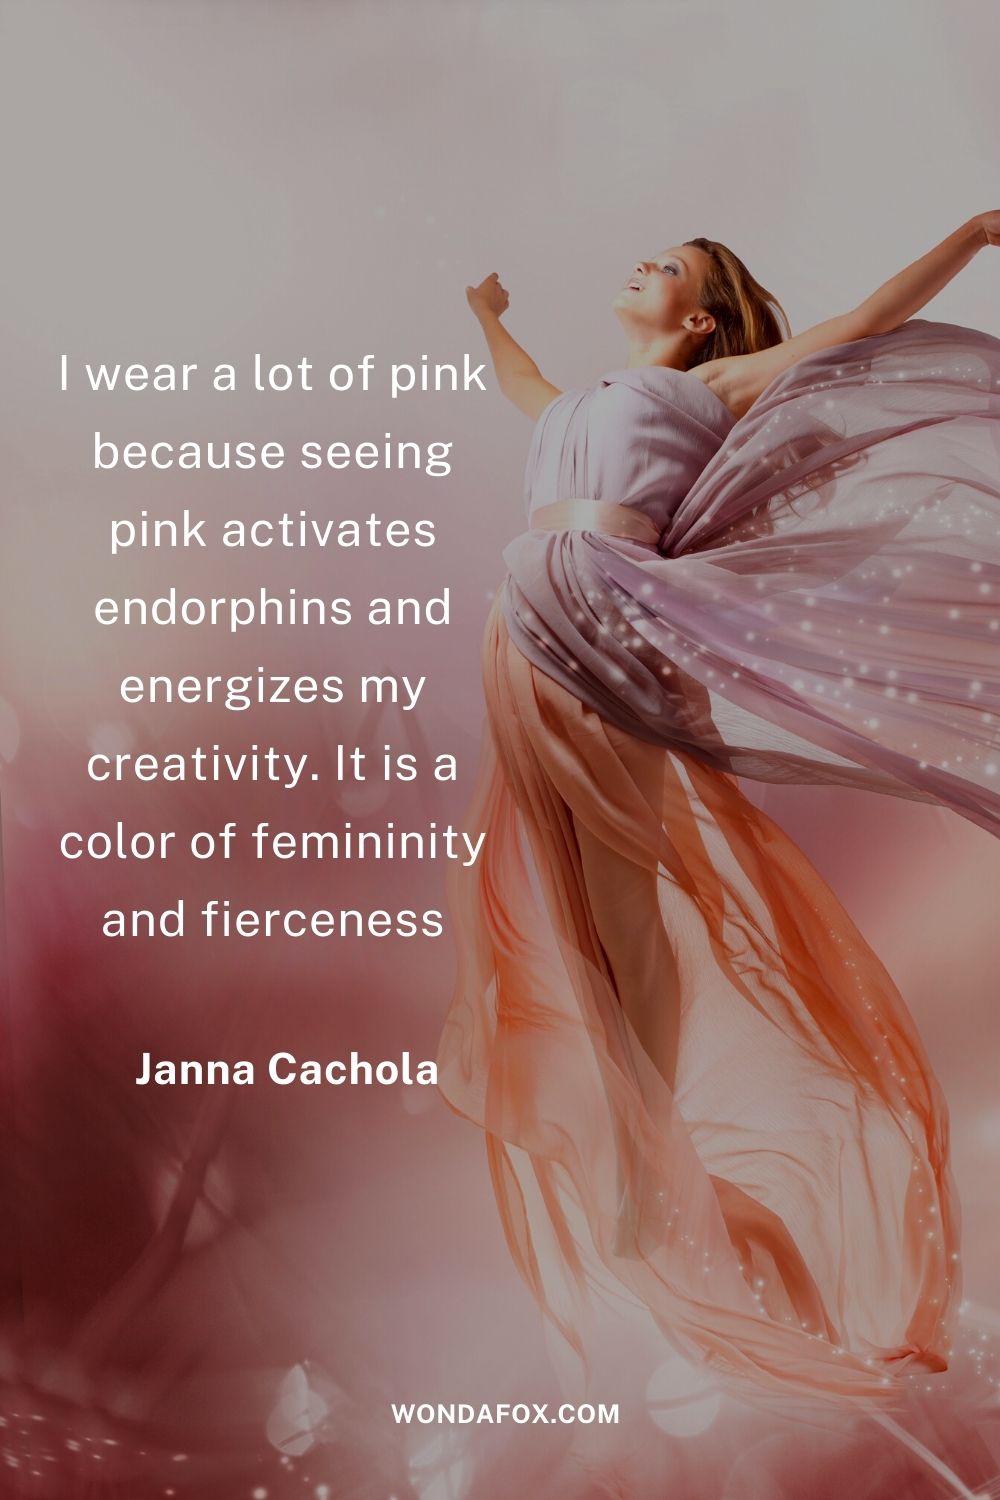 I wear a lot of pink because seeing pink activates endorphins and energizes my creativity. It is a color of femininity and fierceness